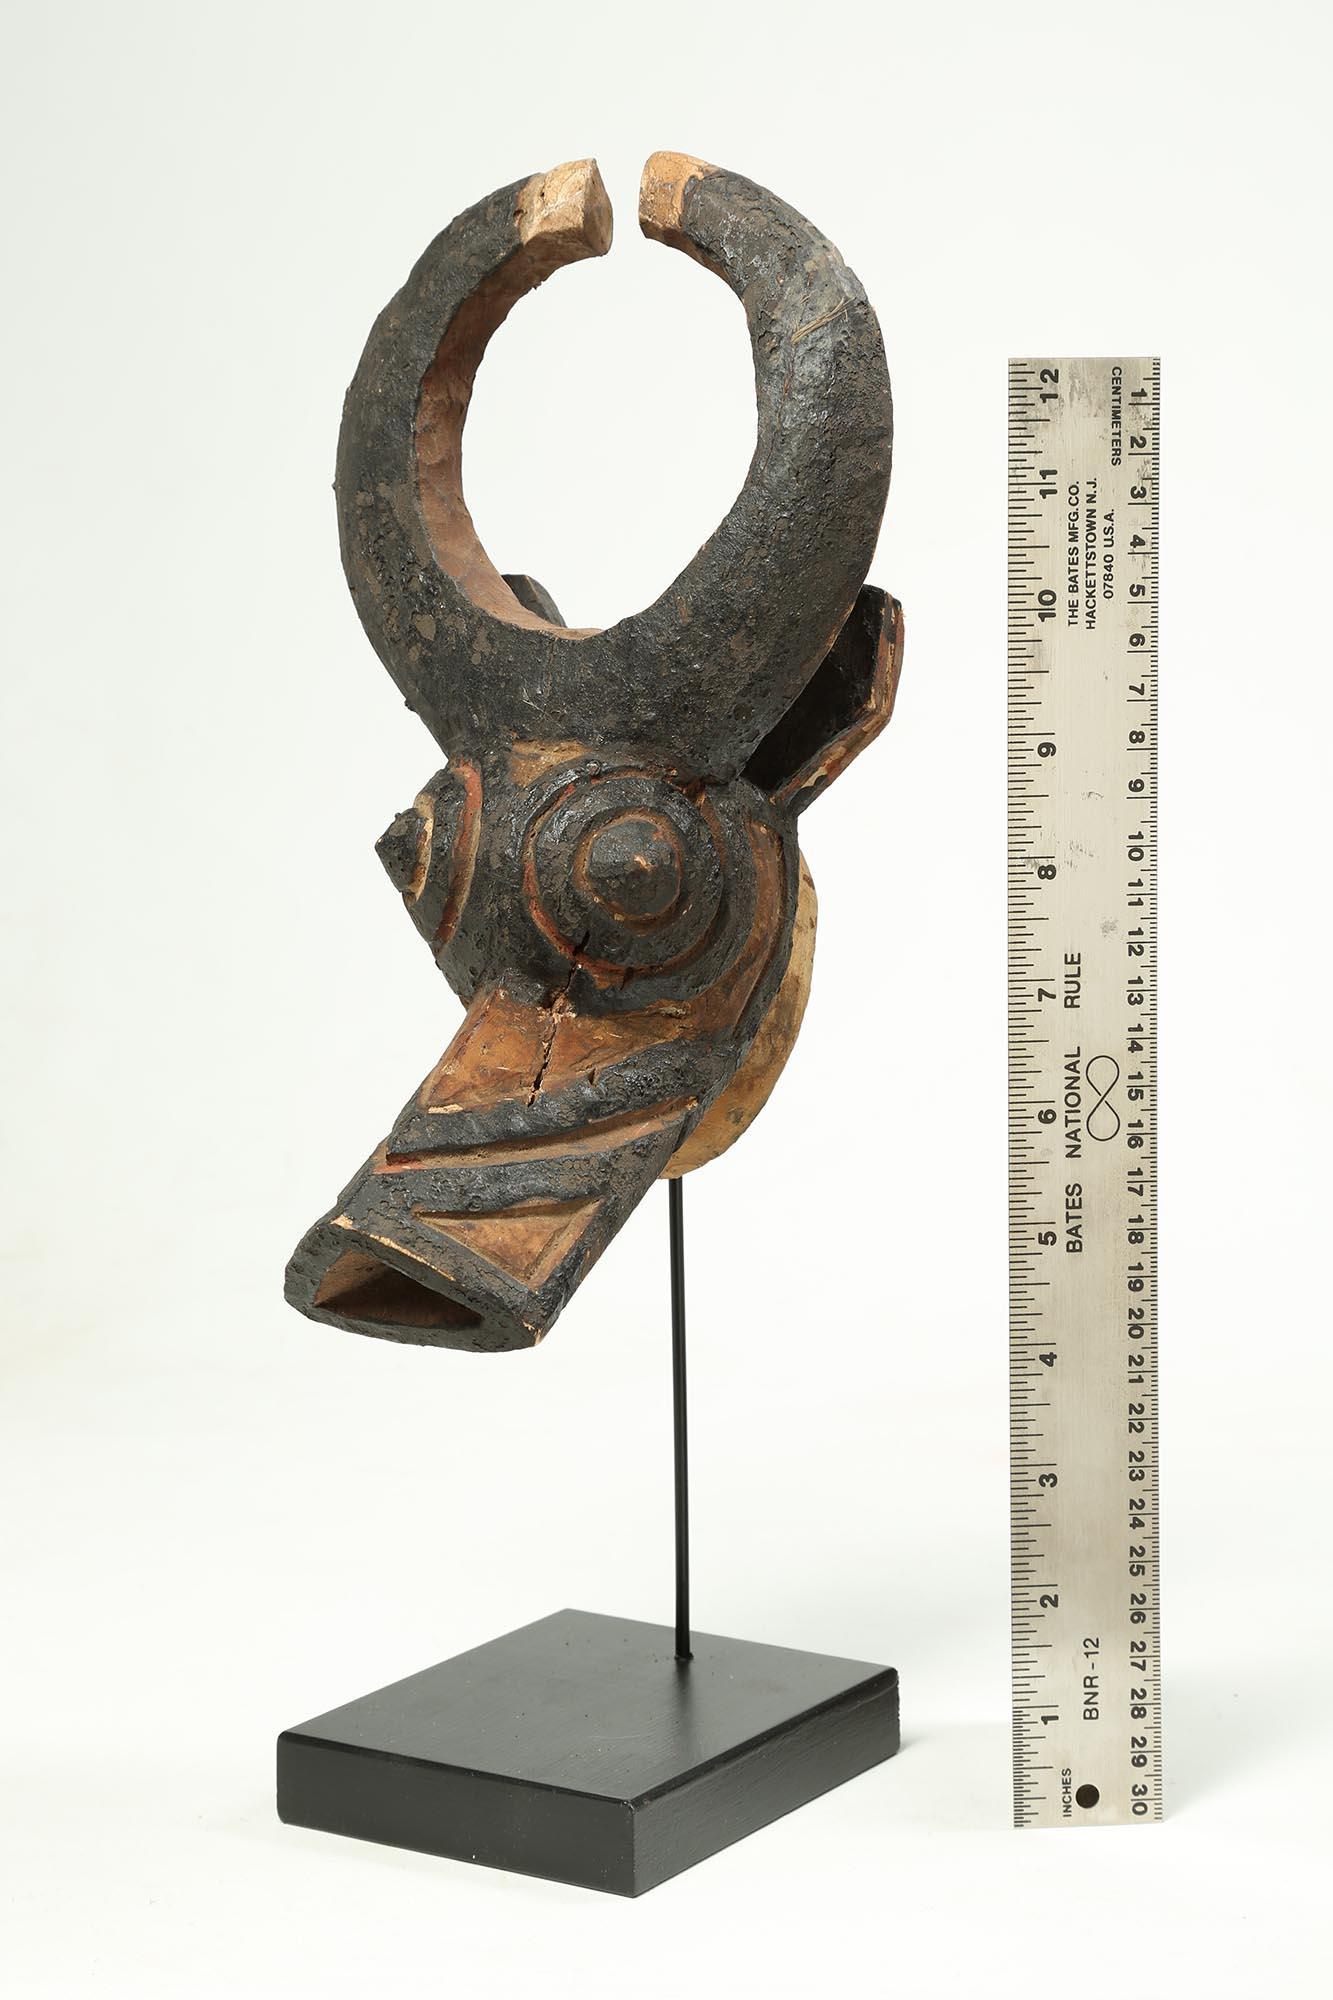 Wood Contented Bush-Cow Mask, Burkina Faso, Early 20th Century Africa